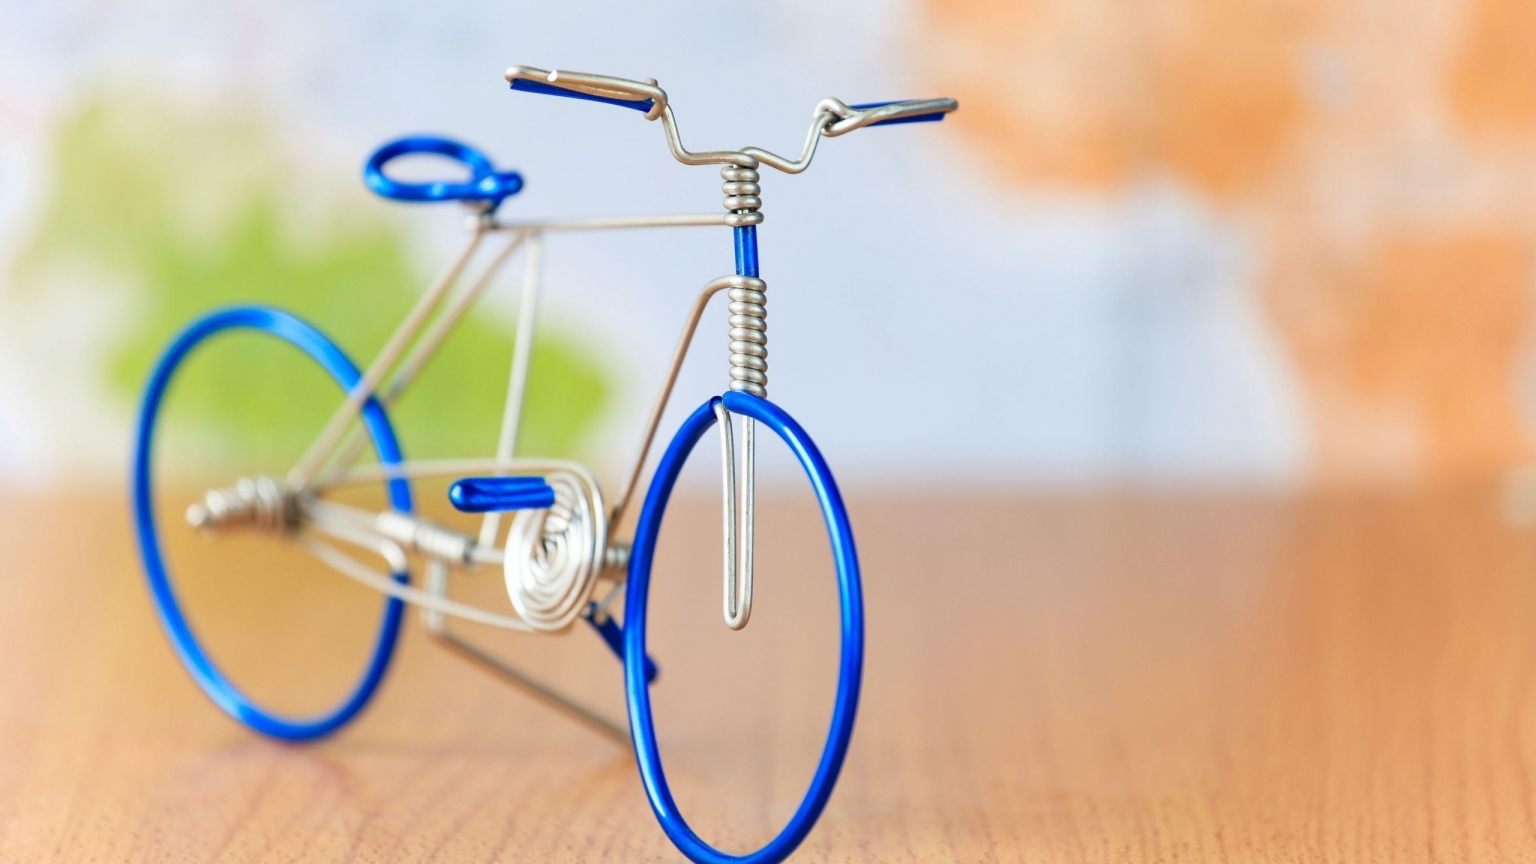 Handmade Bicycle for 1536 x 864 HDTV resolution